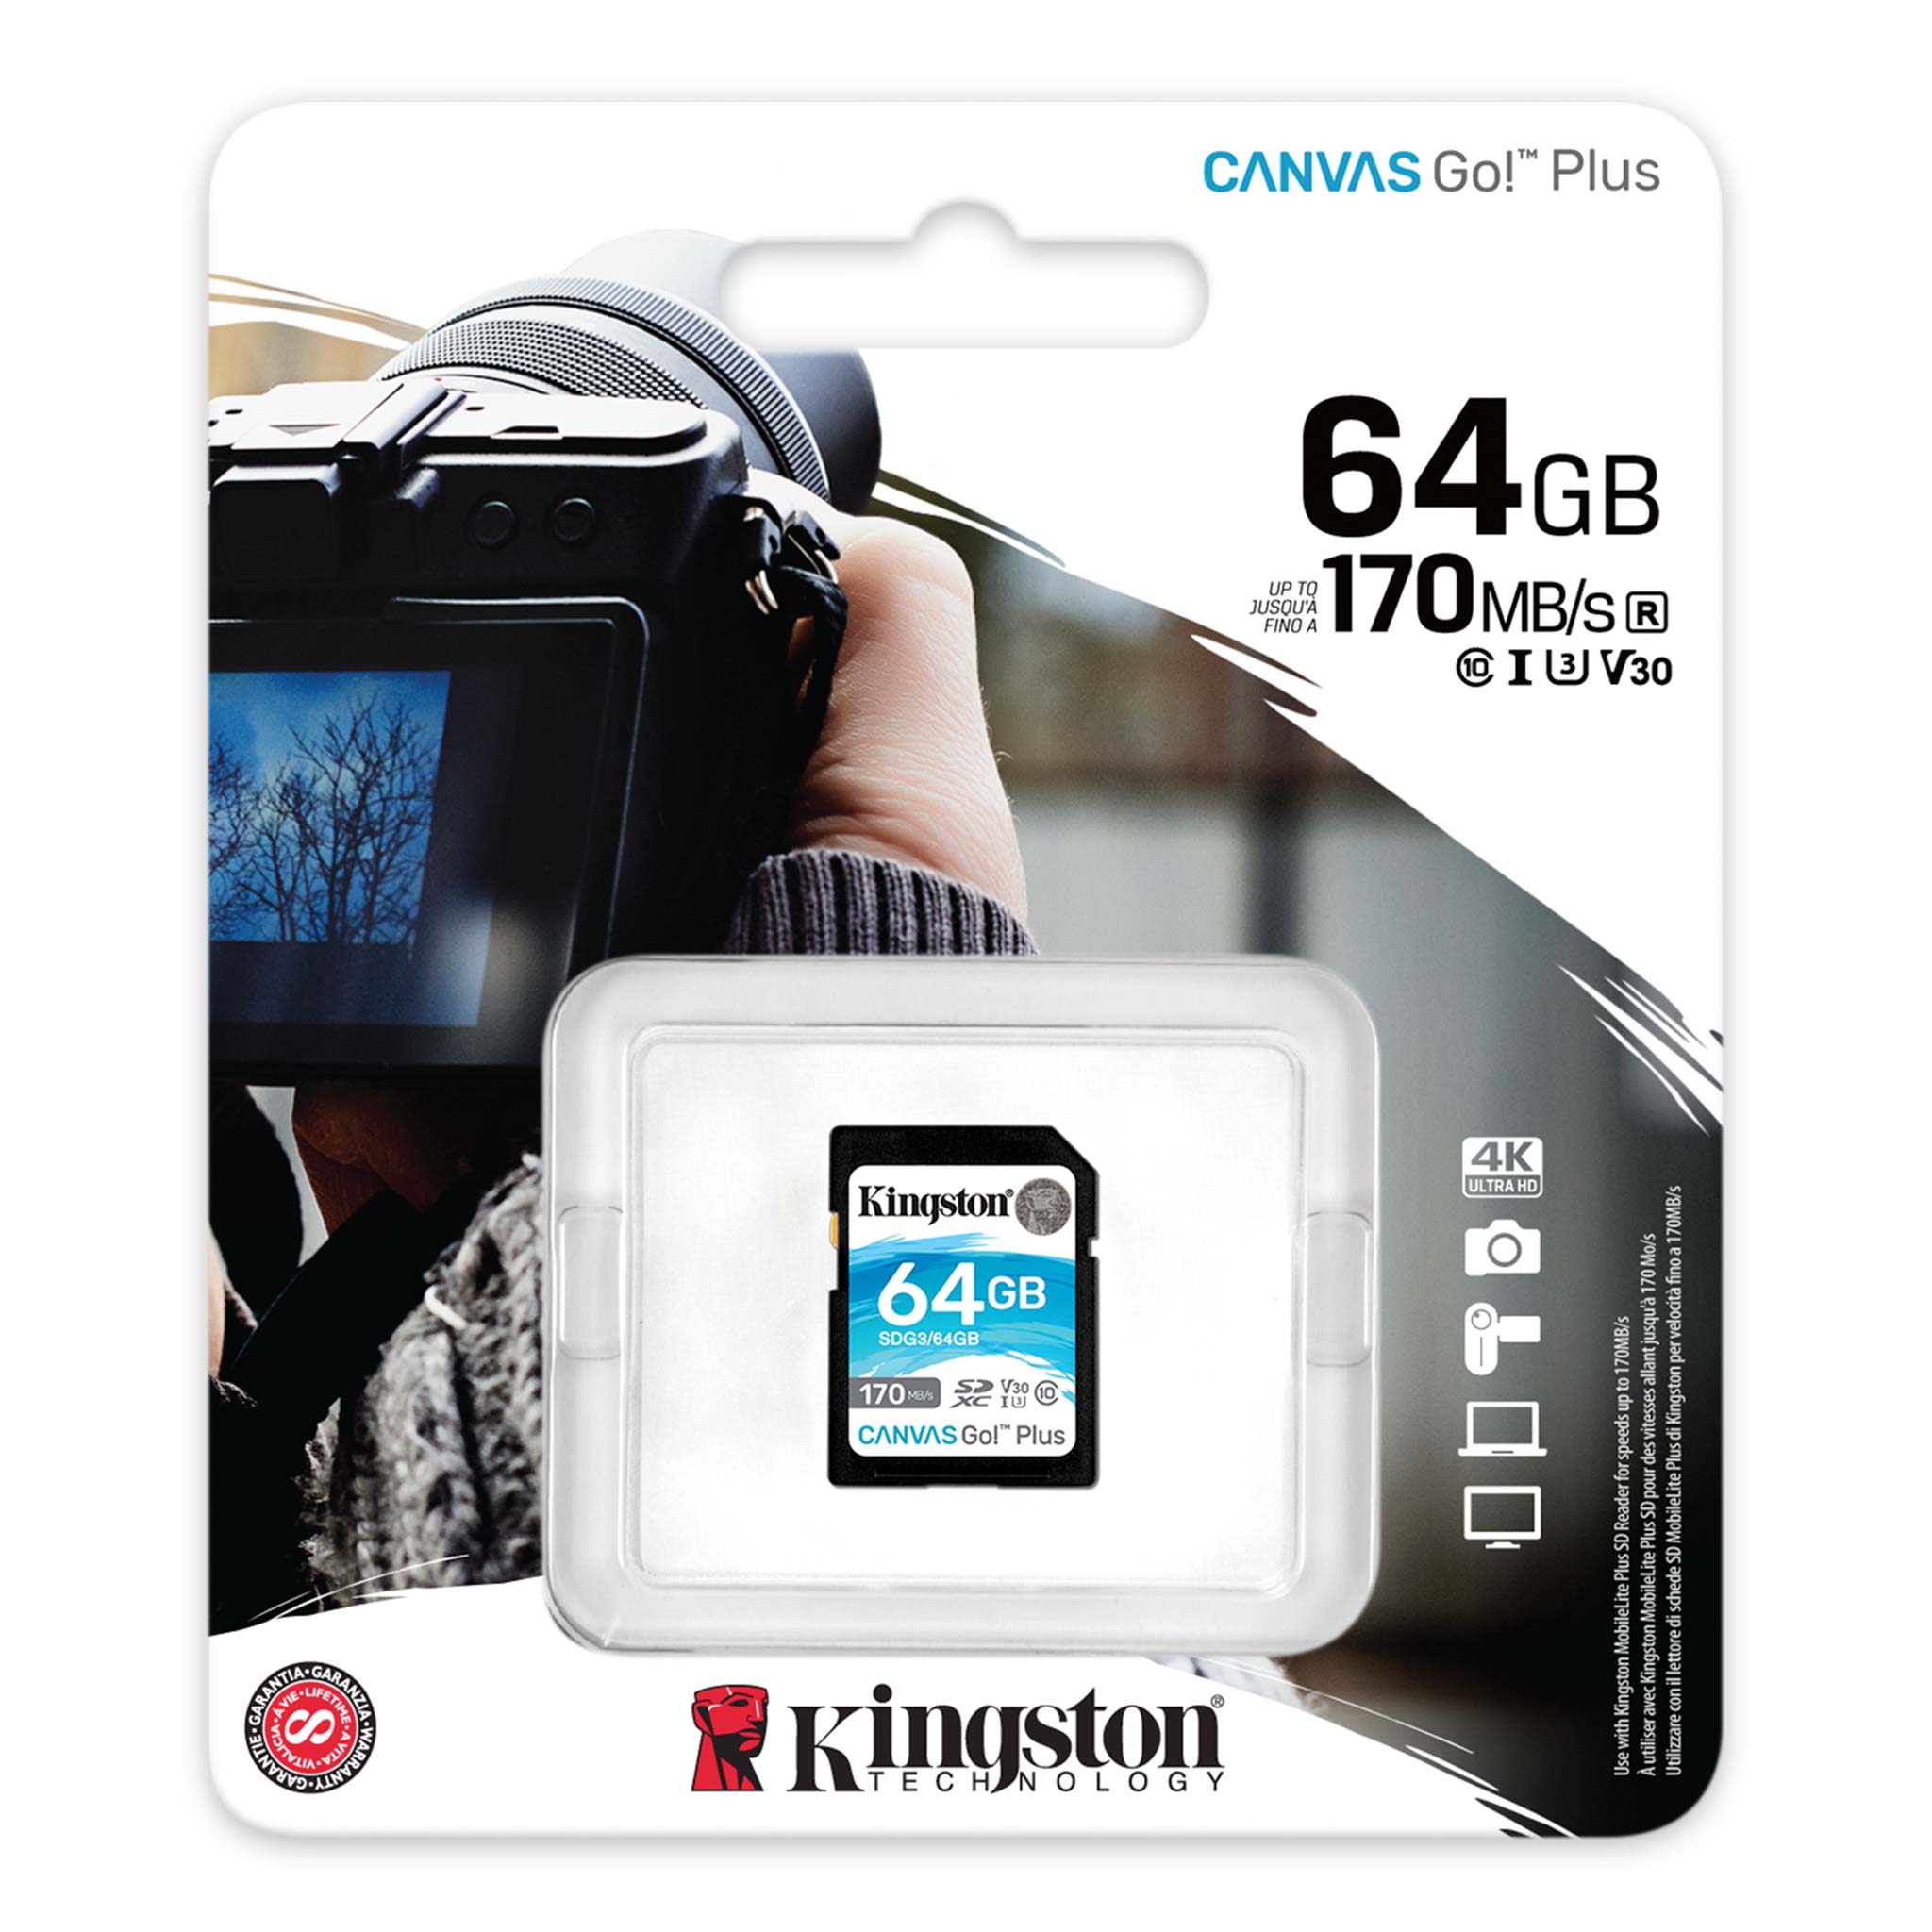 100MBs Works with Kingston Kingston 64GB ARCHOS Diamond 2 Note MicroSDXC Canvas Select Plus Card Verified by SanFlash. 